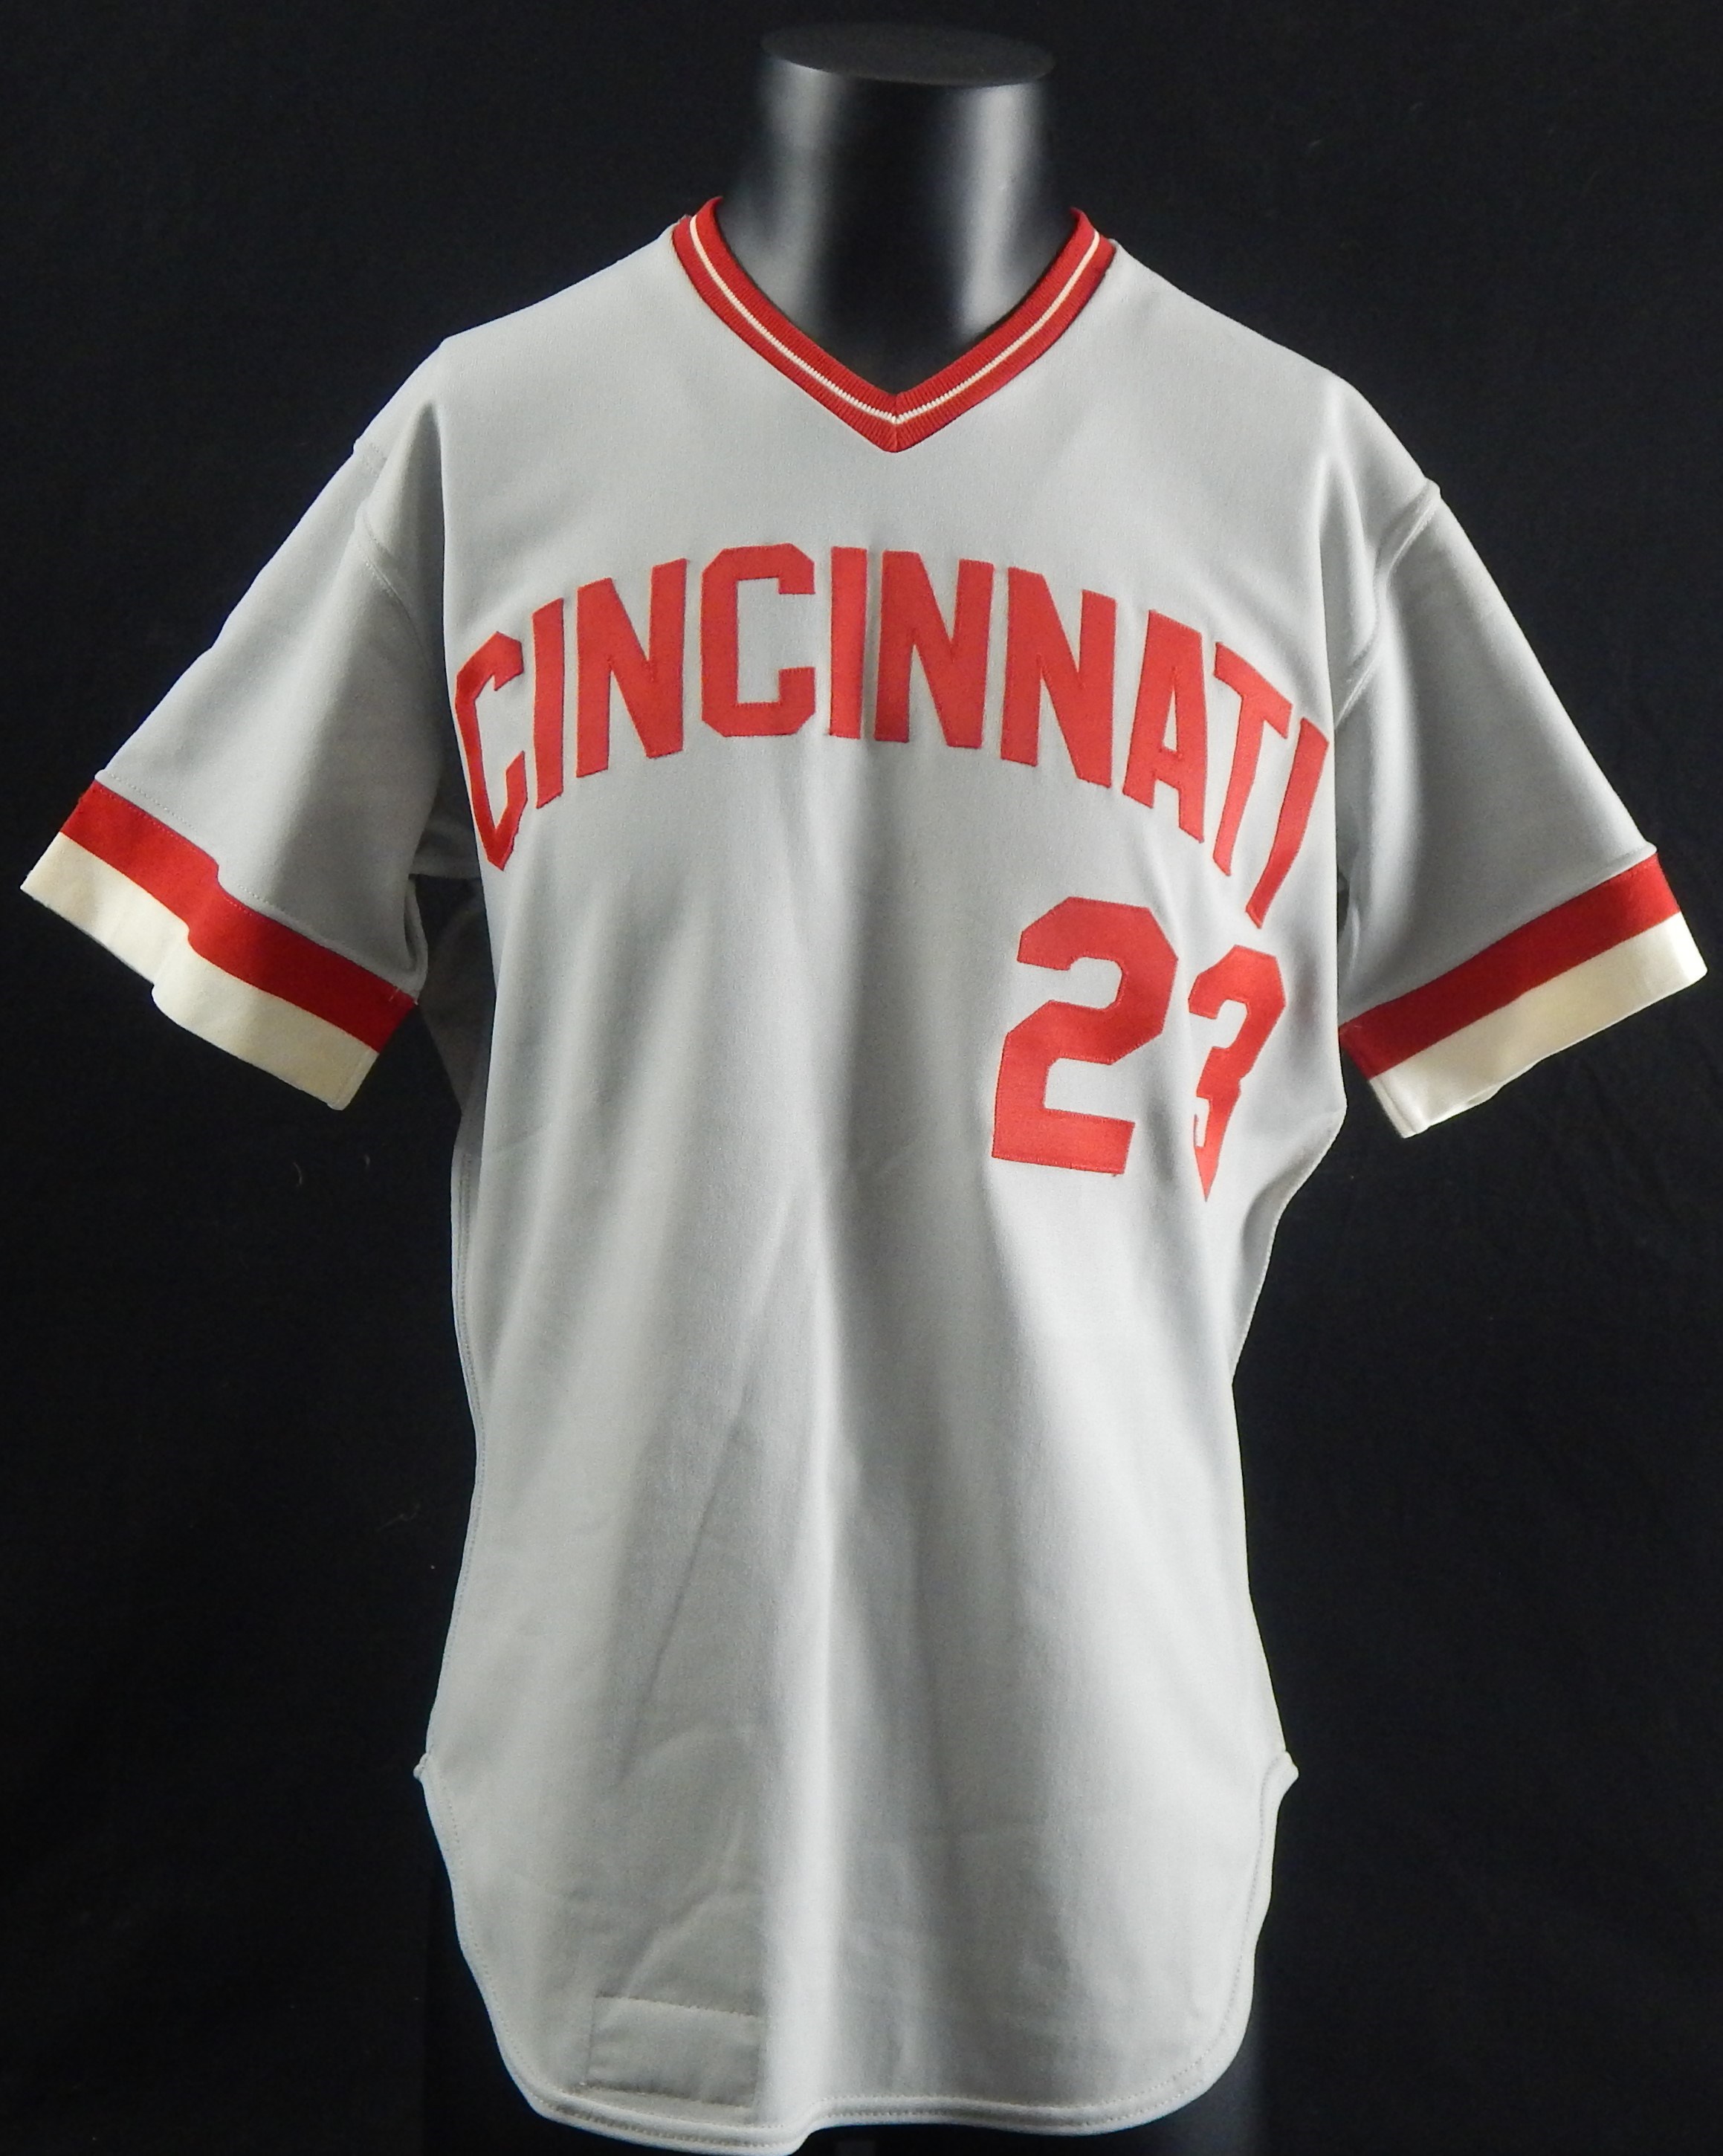 1978 Tour of Japan Cincinnati Reds Jersey From the Bernie Stowe Collection